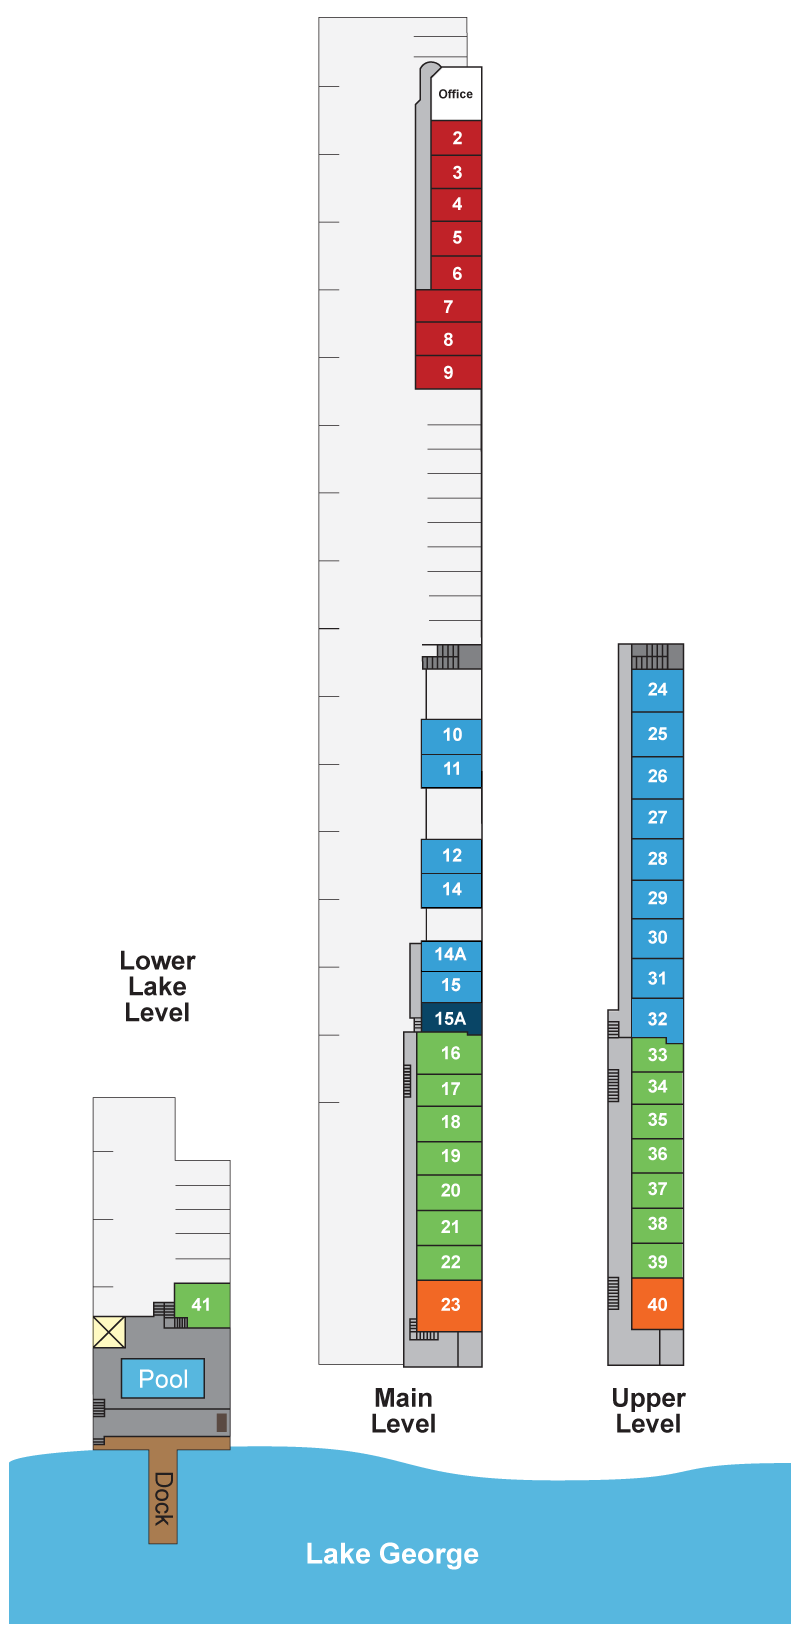 Propert layout illustration showing lower lake level with room 41 and pool; main level with the office and rooms grouped 2-9, 10-11, 12 and 14, 14a and 15, 15a, 16-22 and 23; and upper level with grouped rooms 24-32, 33-39 and room 40.